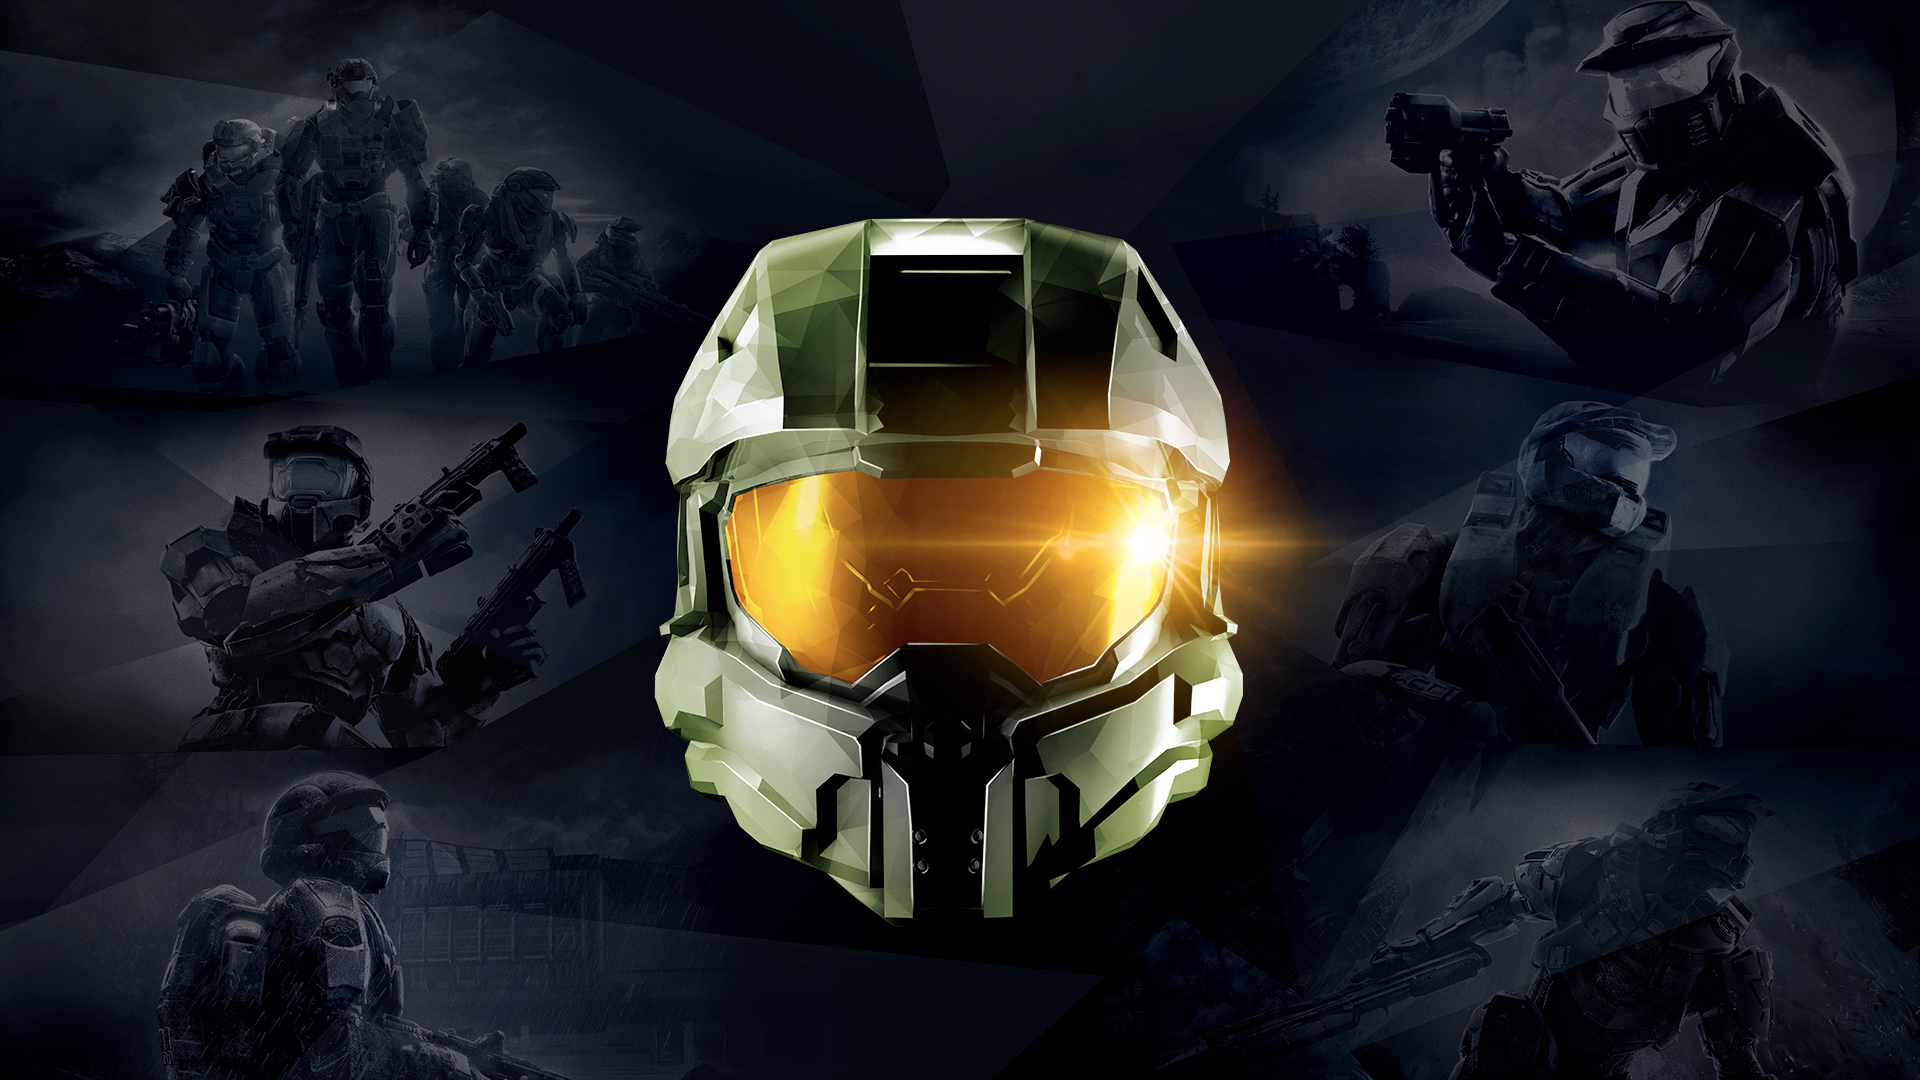 Spartan, the Master Chief